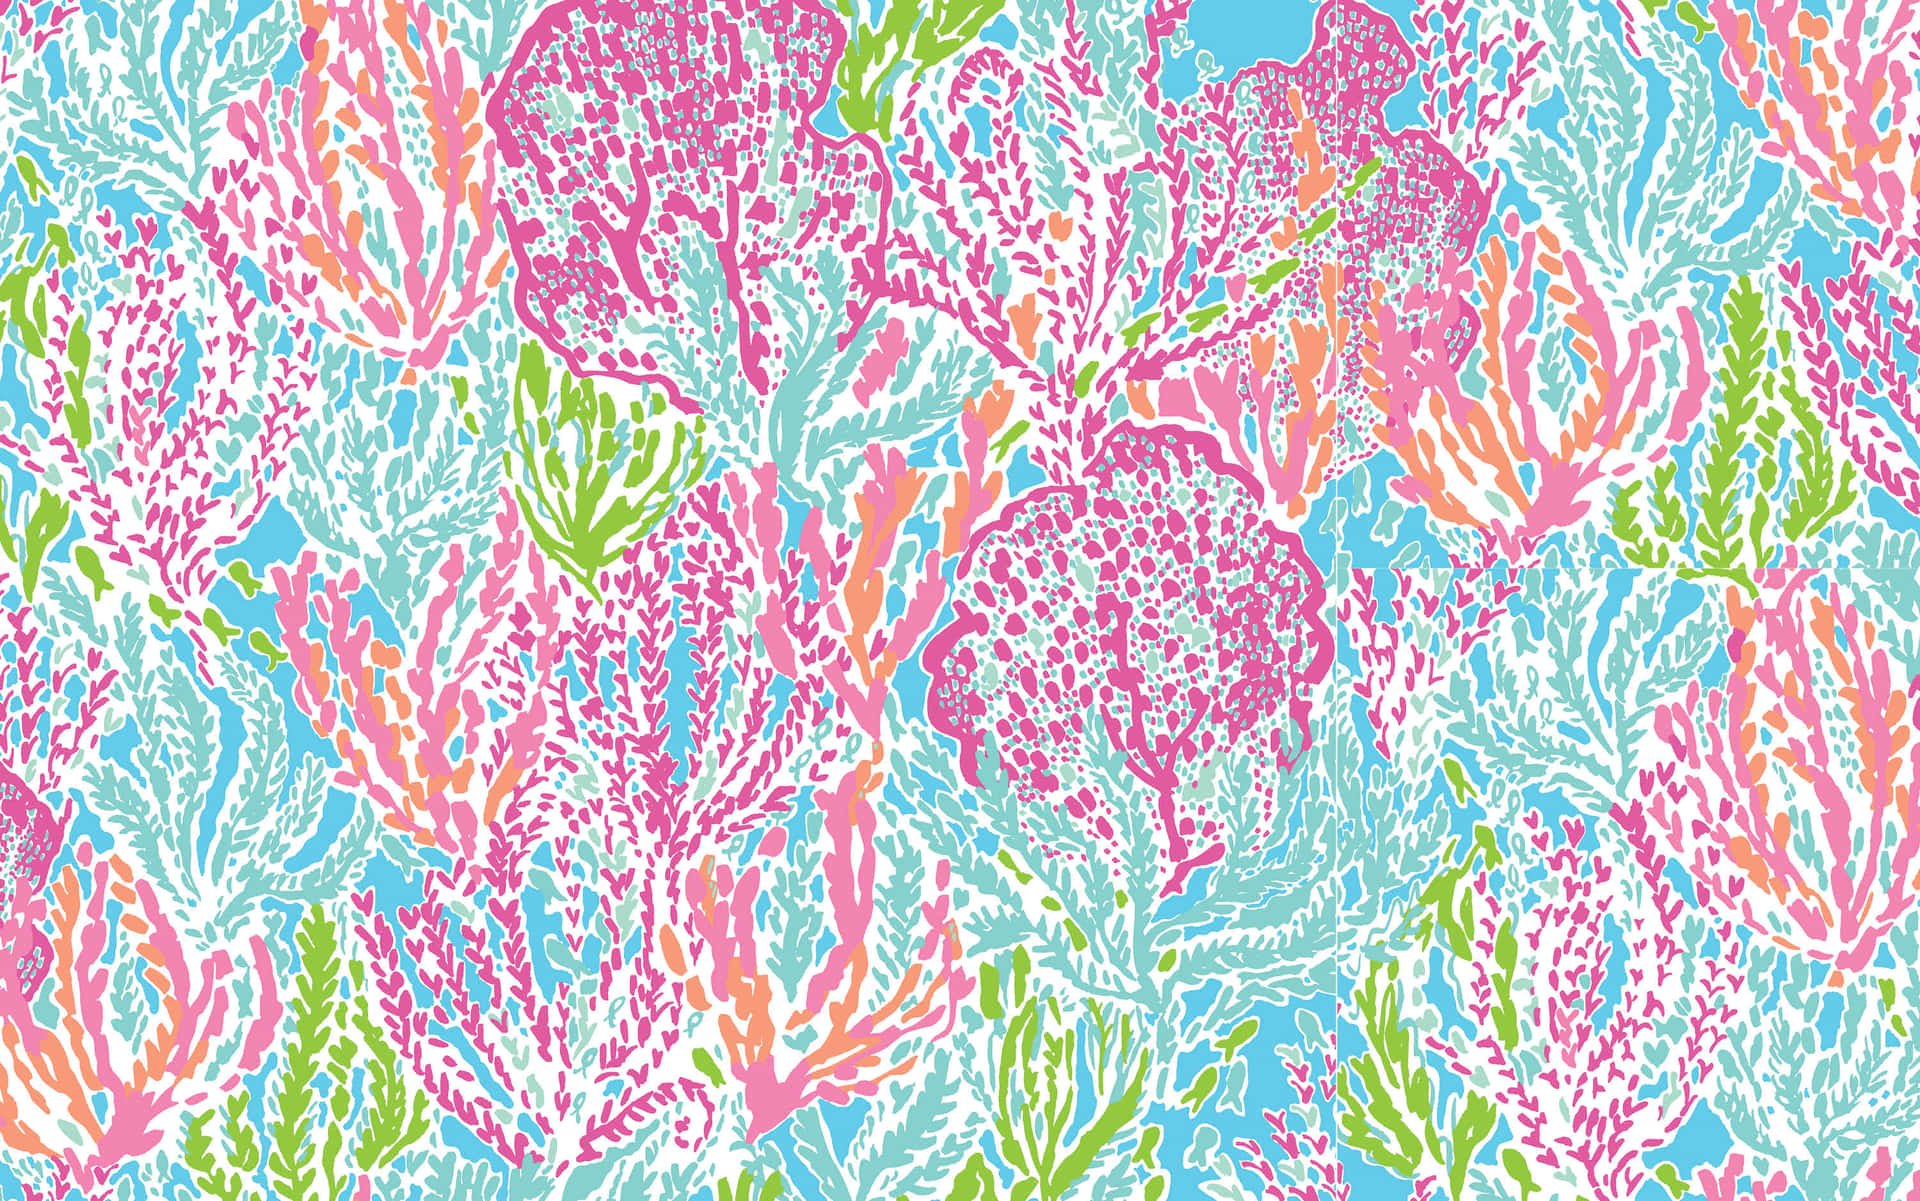 100+] Lilly Pulitzer Backgrounds